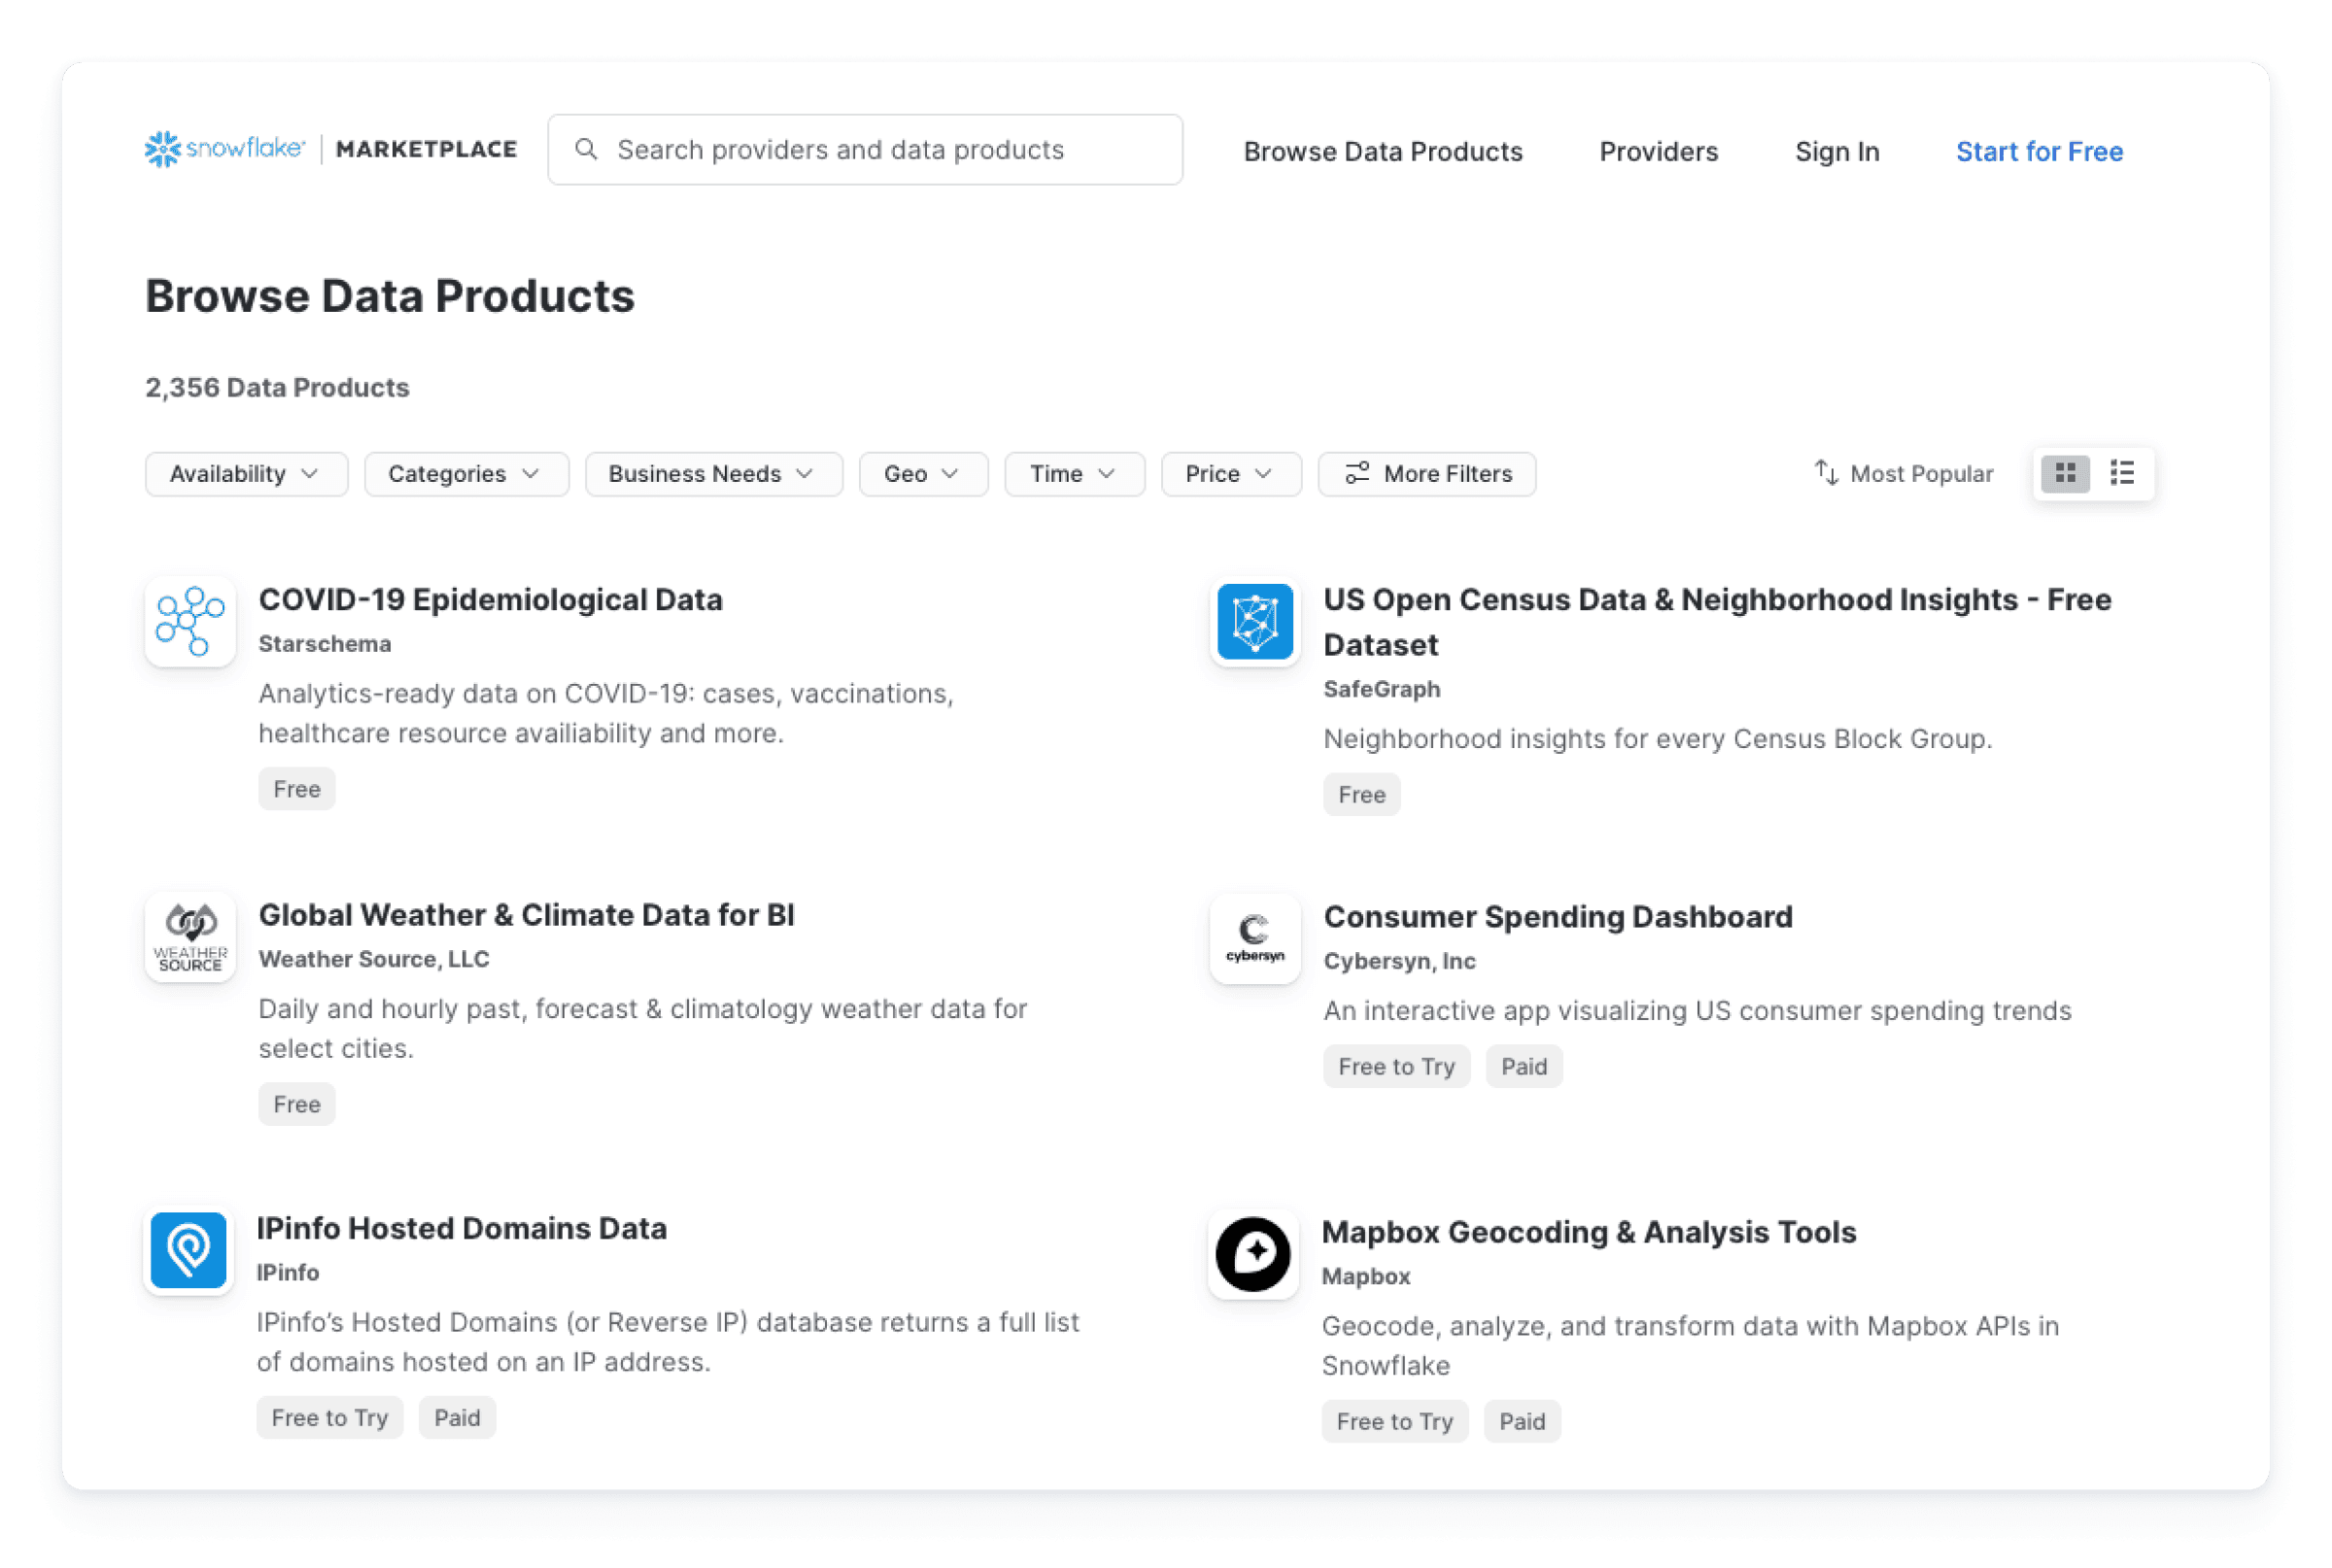 Screenshot of Data Product listings in the Snowflake Marketplace